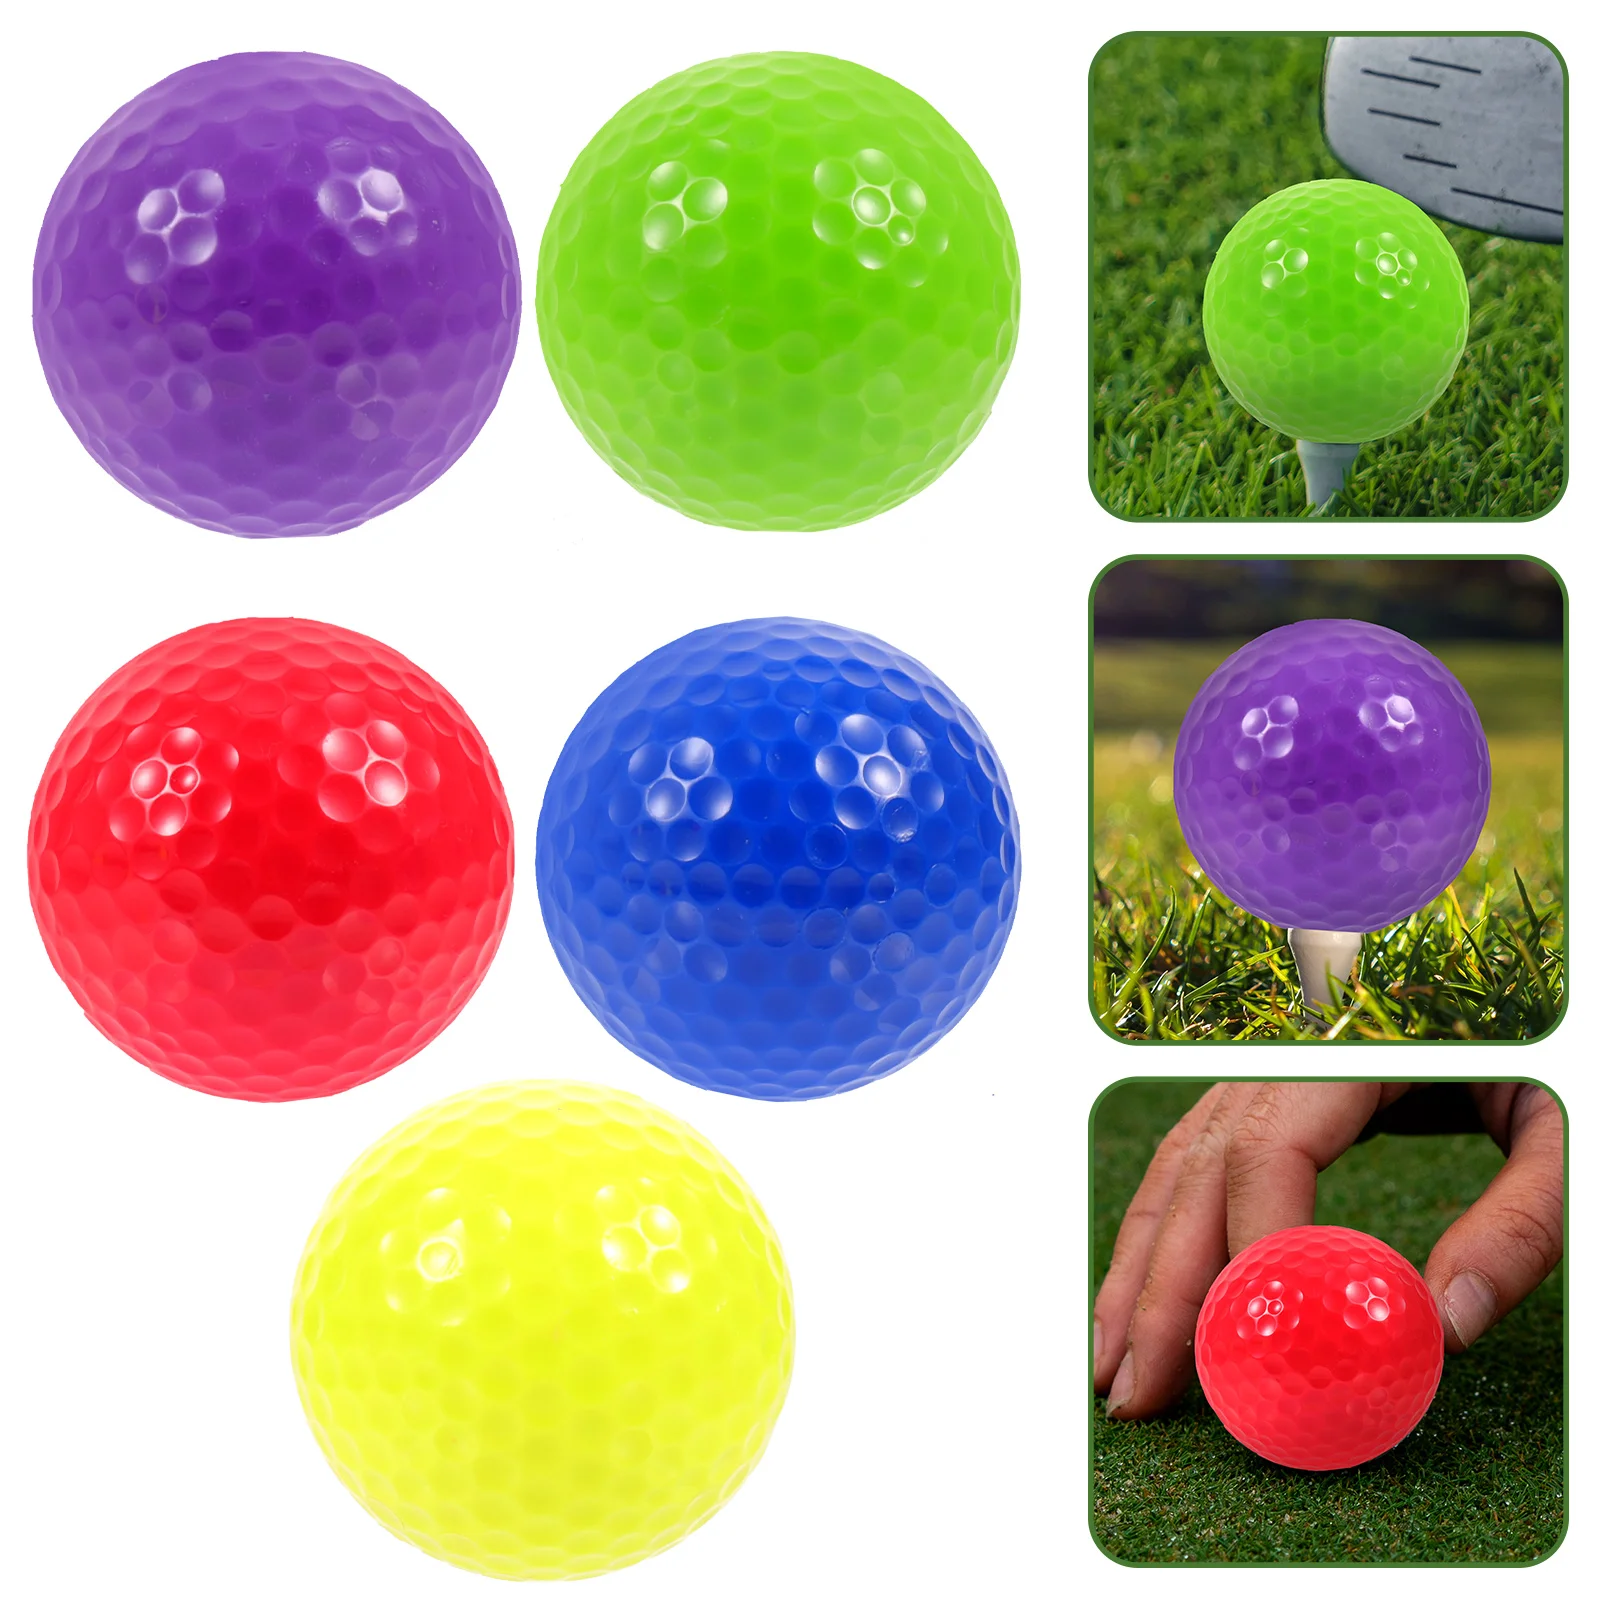 

5 Pcs Kids Golf Balls Golfing Accessory Practicing Replaceable Daily Use Compact Training Child